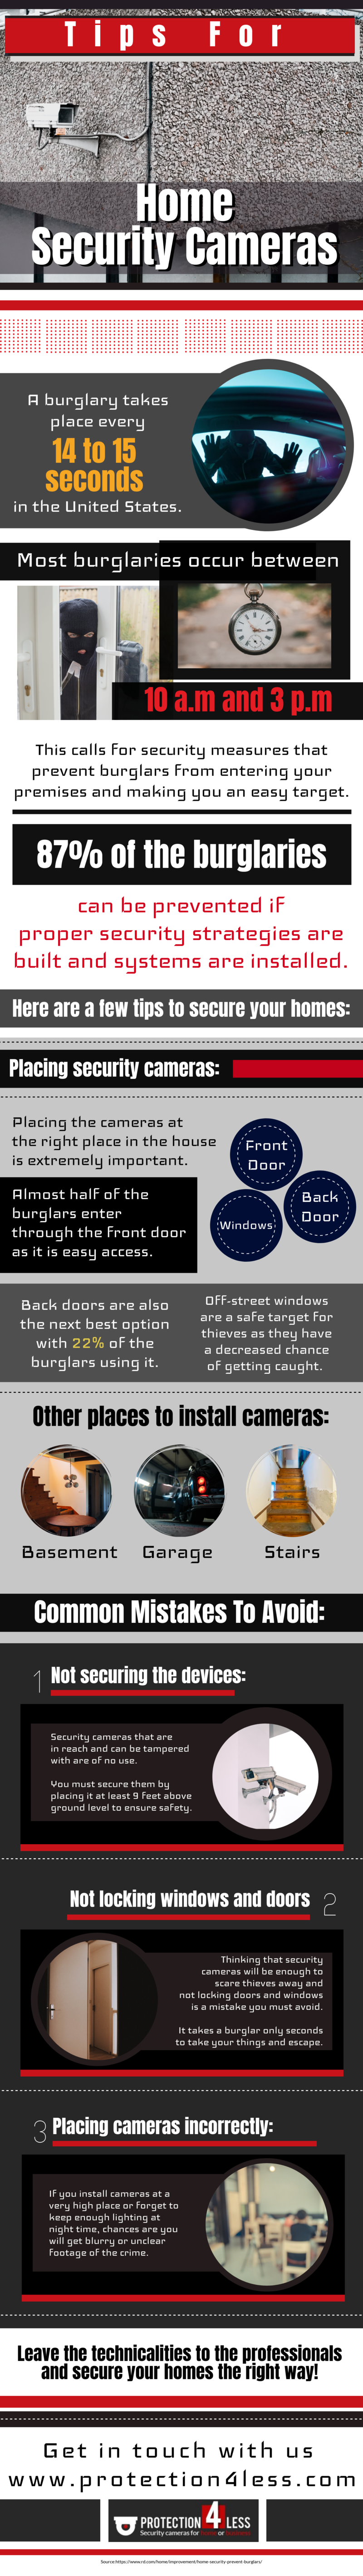 Tips for home security cameras